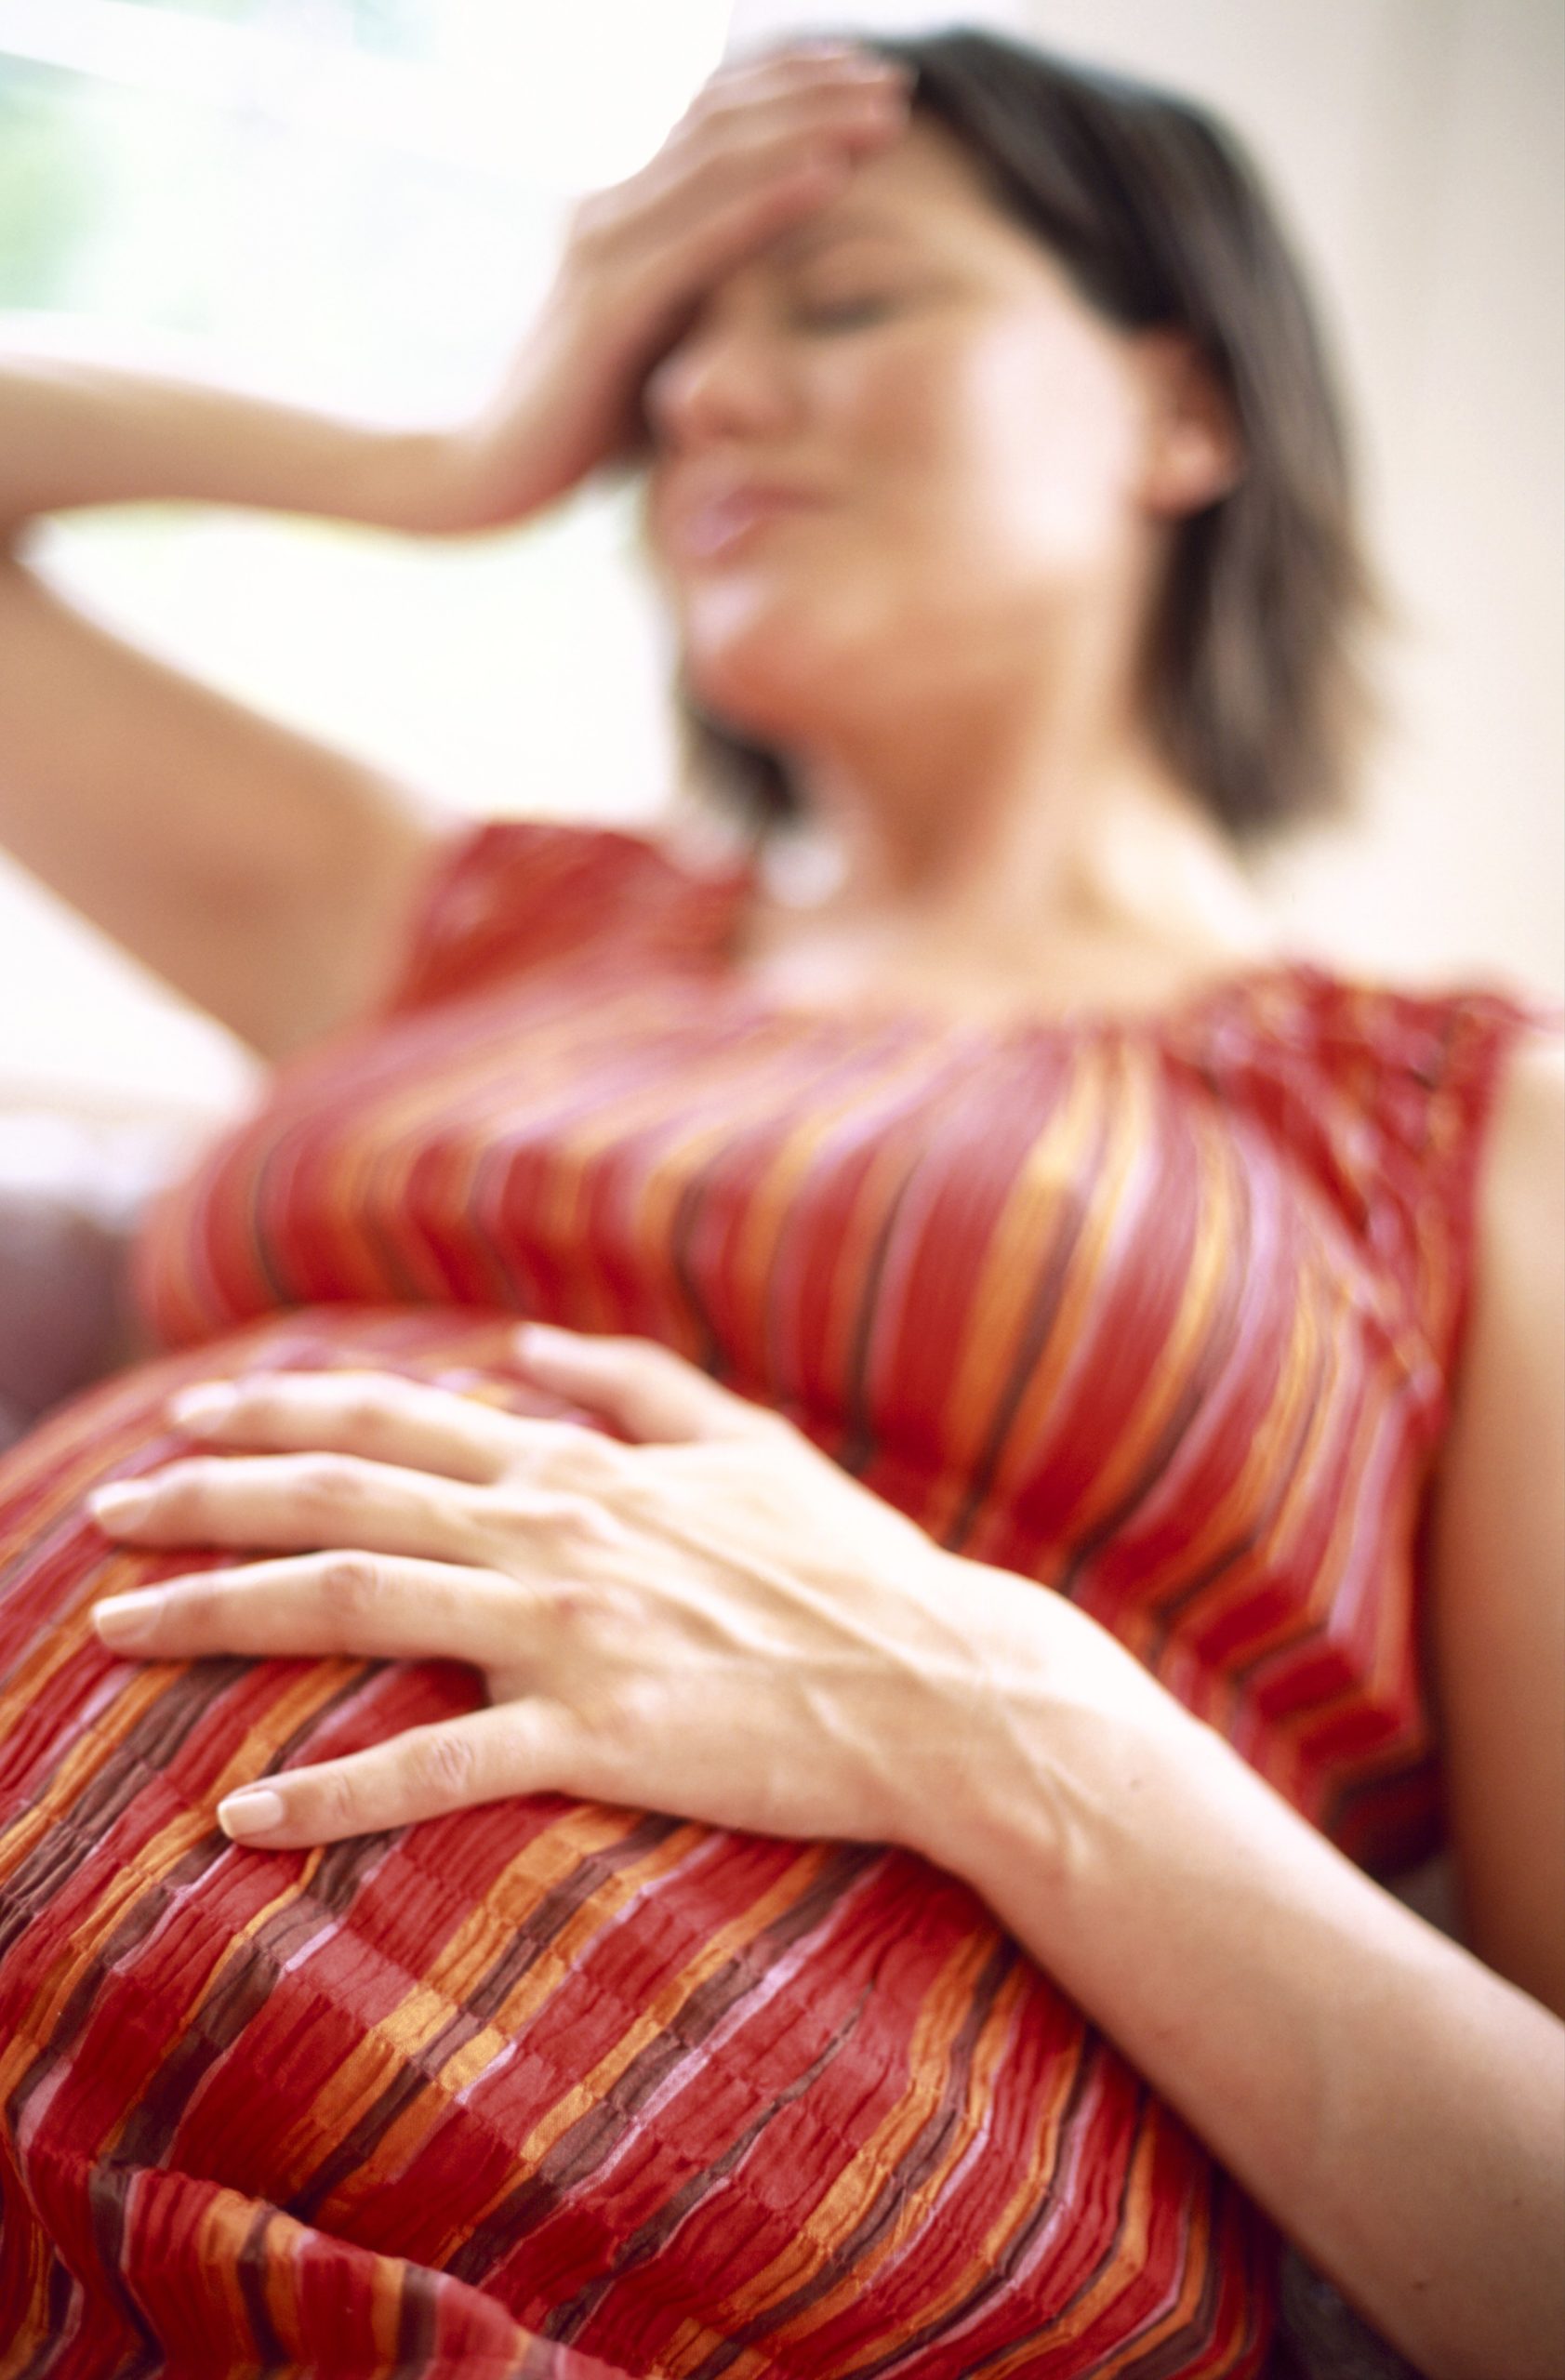 Pregnant woman with one hand on her belly and one hand on her forehead